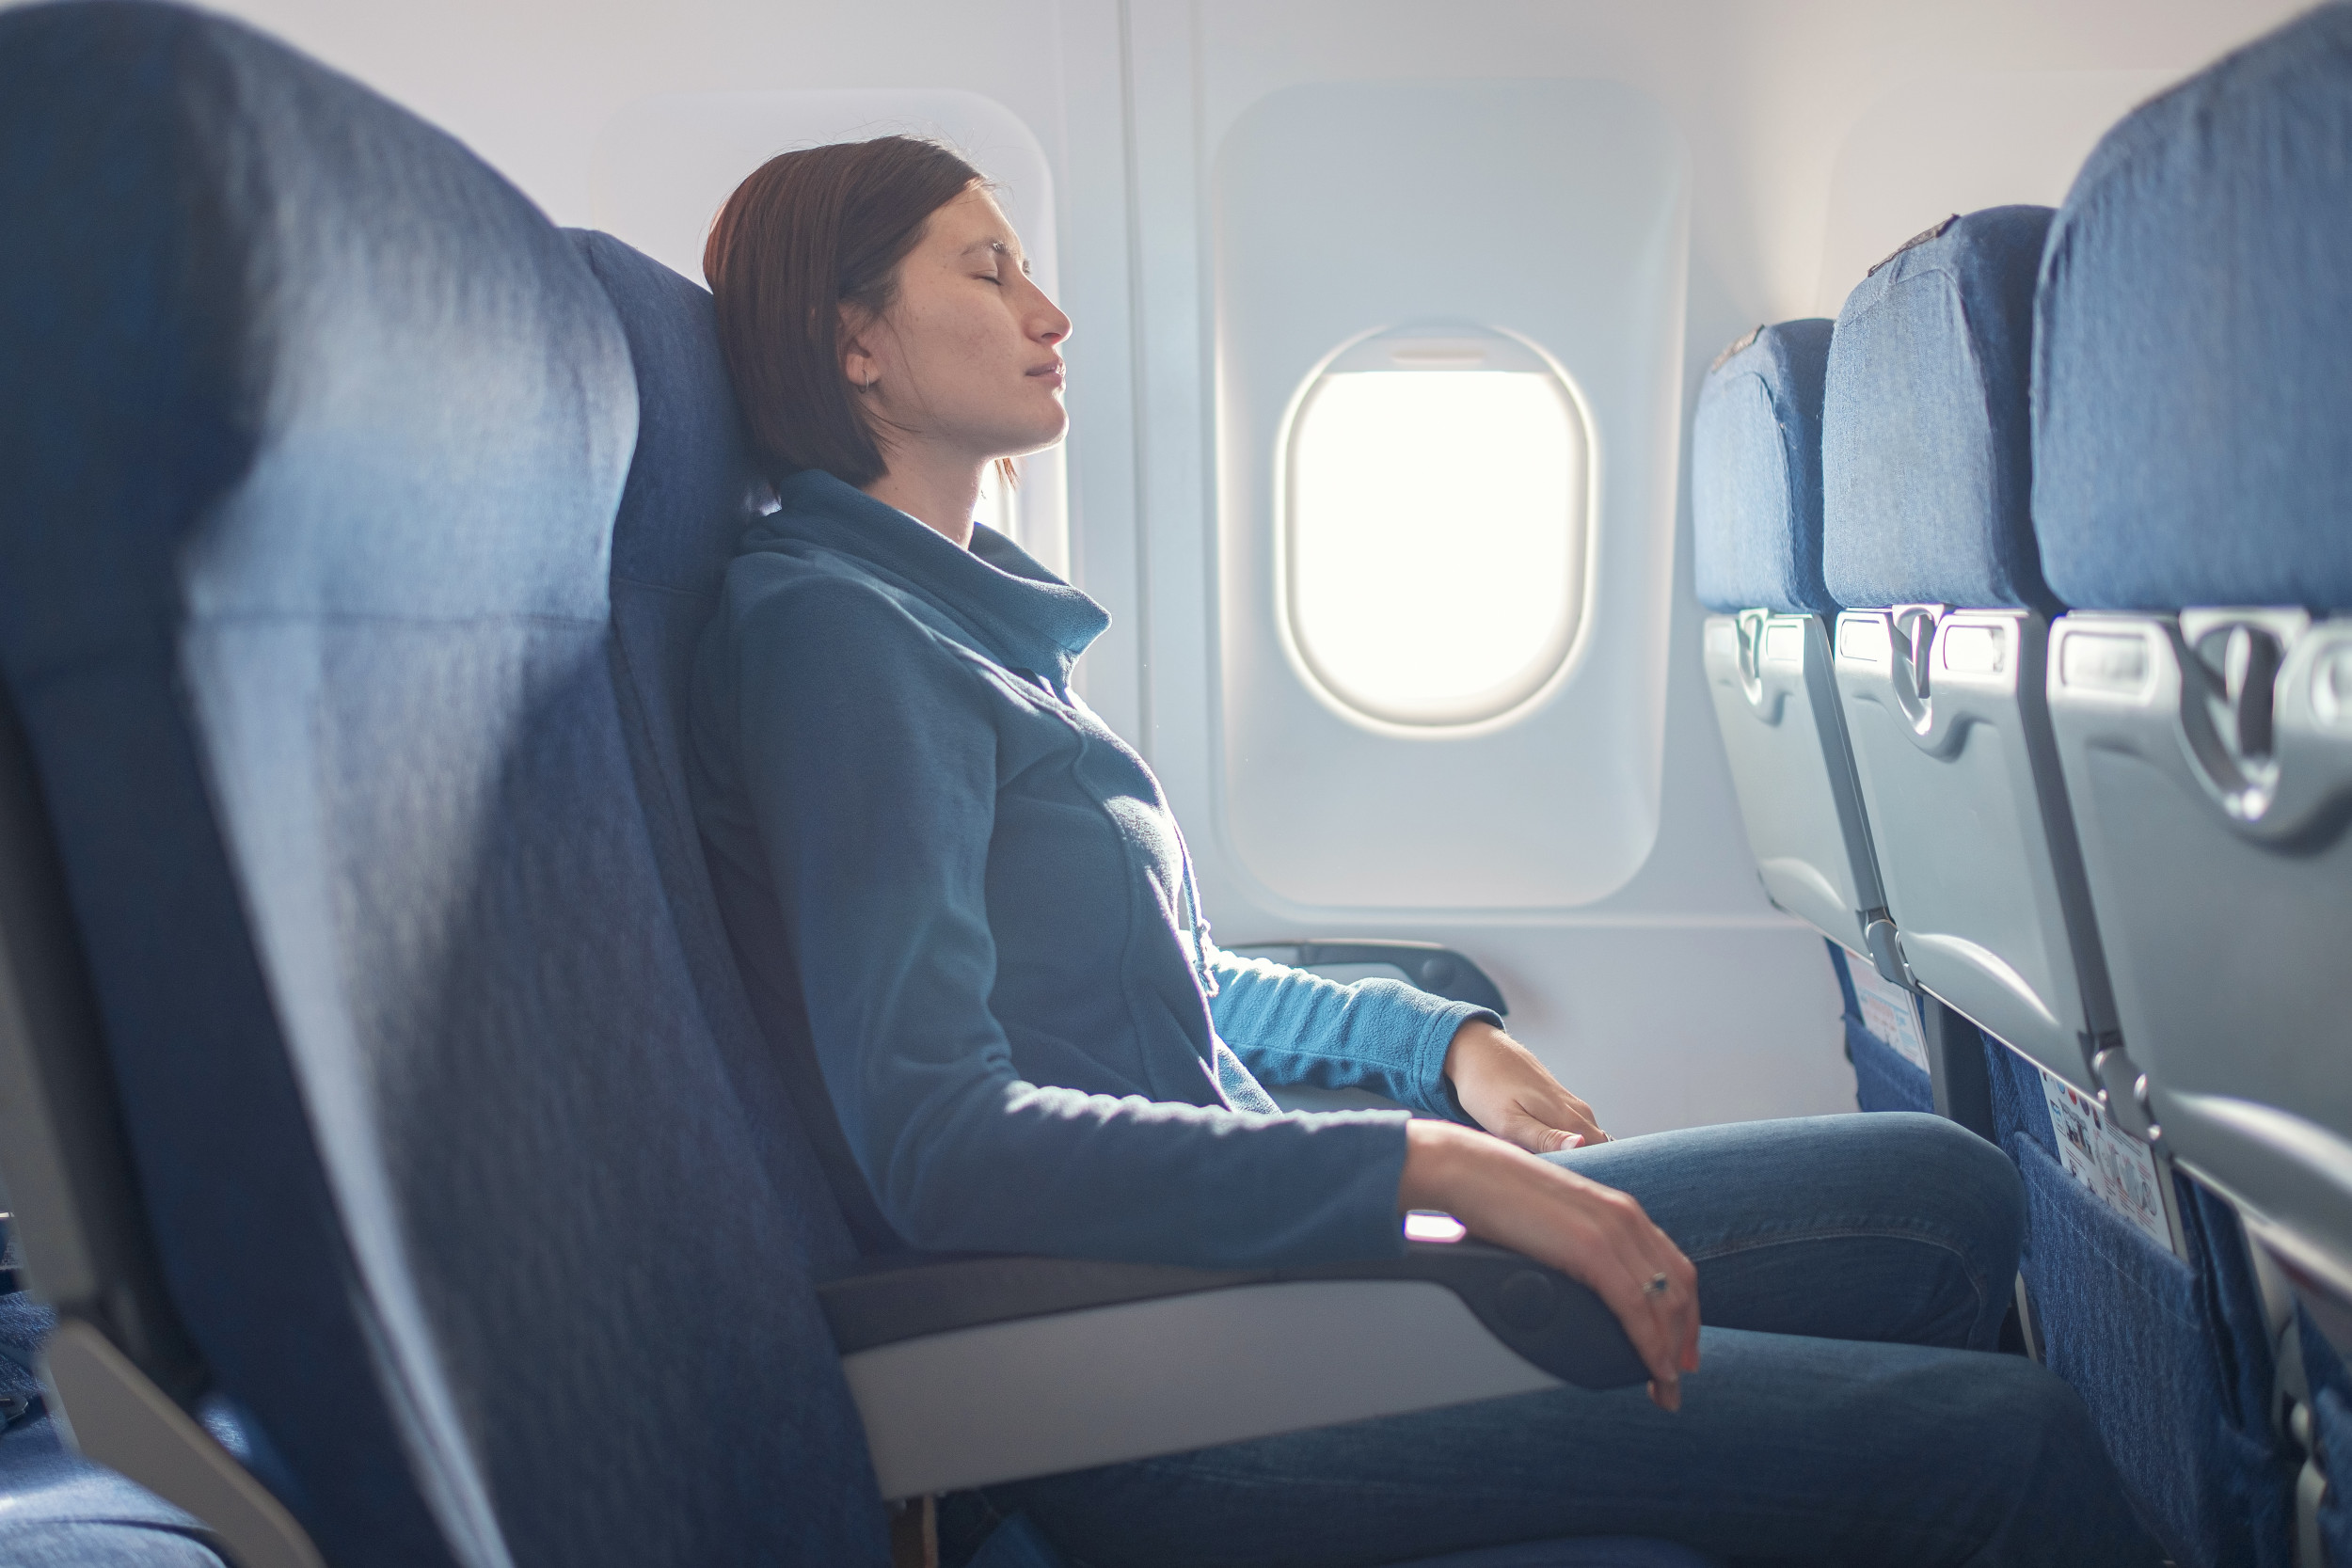 This Plane Hack Could Get You an Entire Row to Yourselves on a Flight